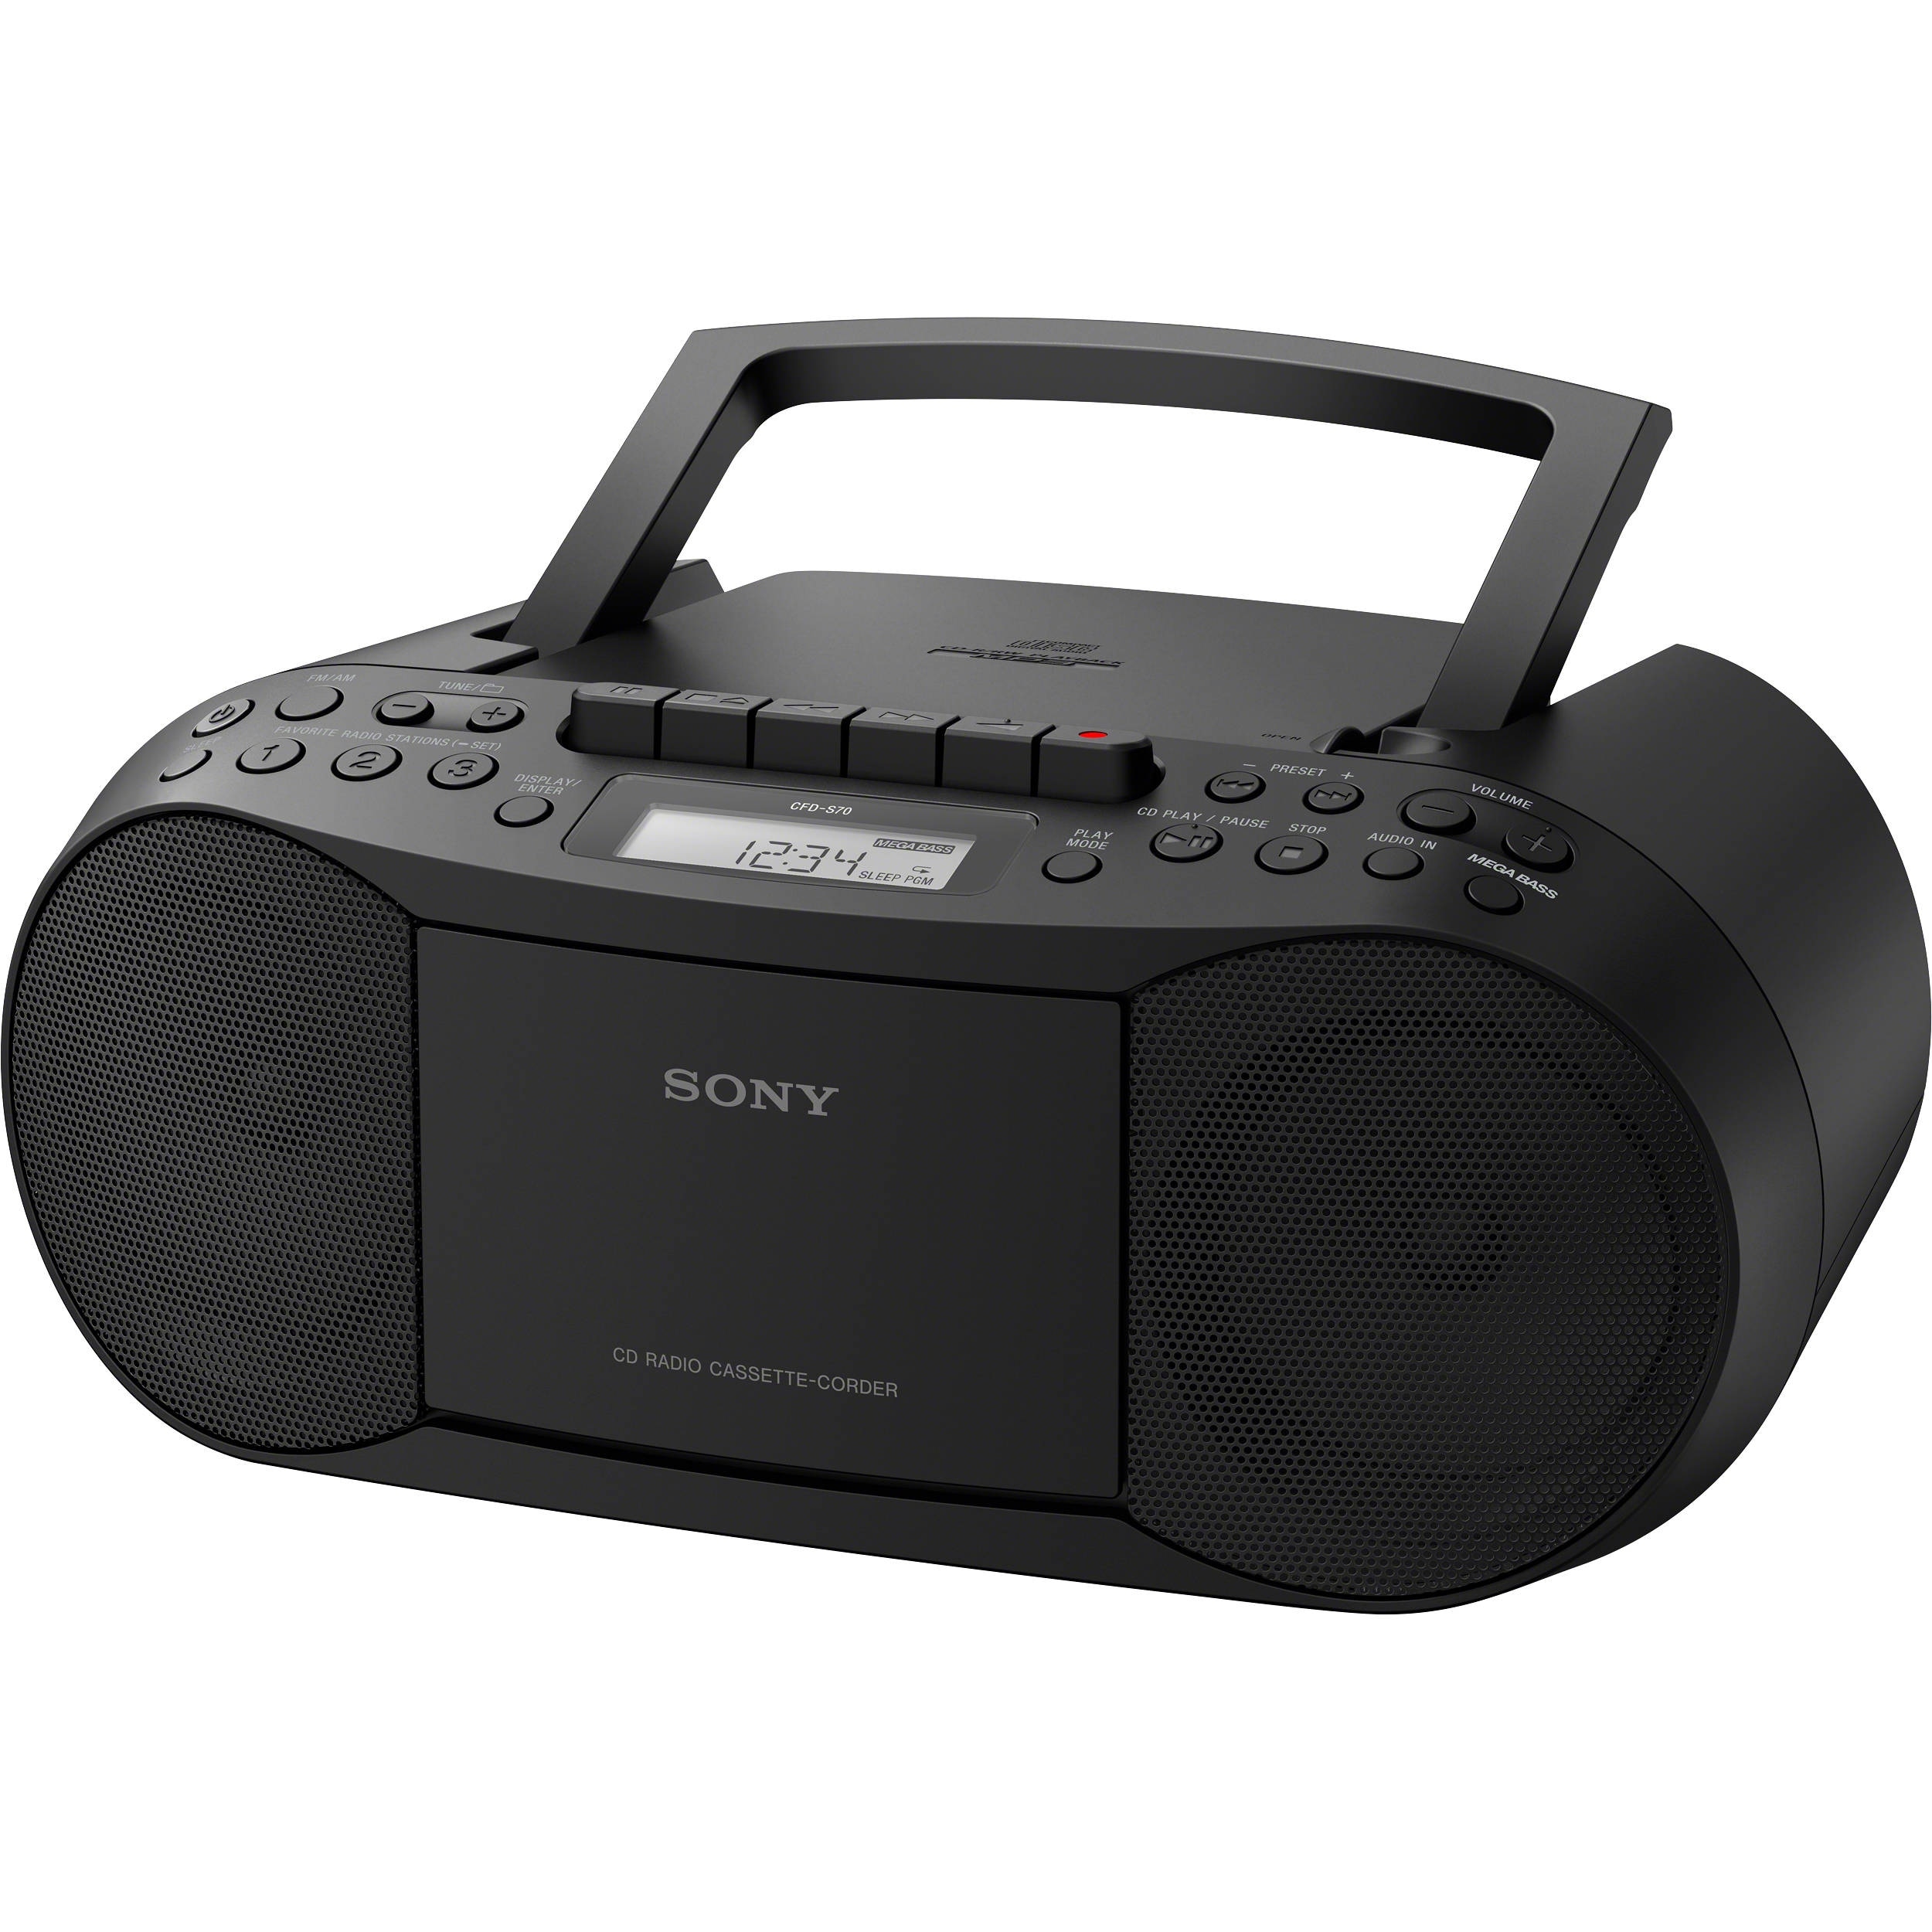 Sony CFDS70-BLK CD/MP3 Cassette Boombox Home Audio Radio